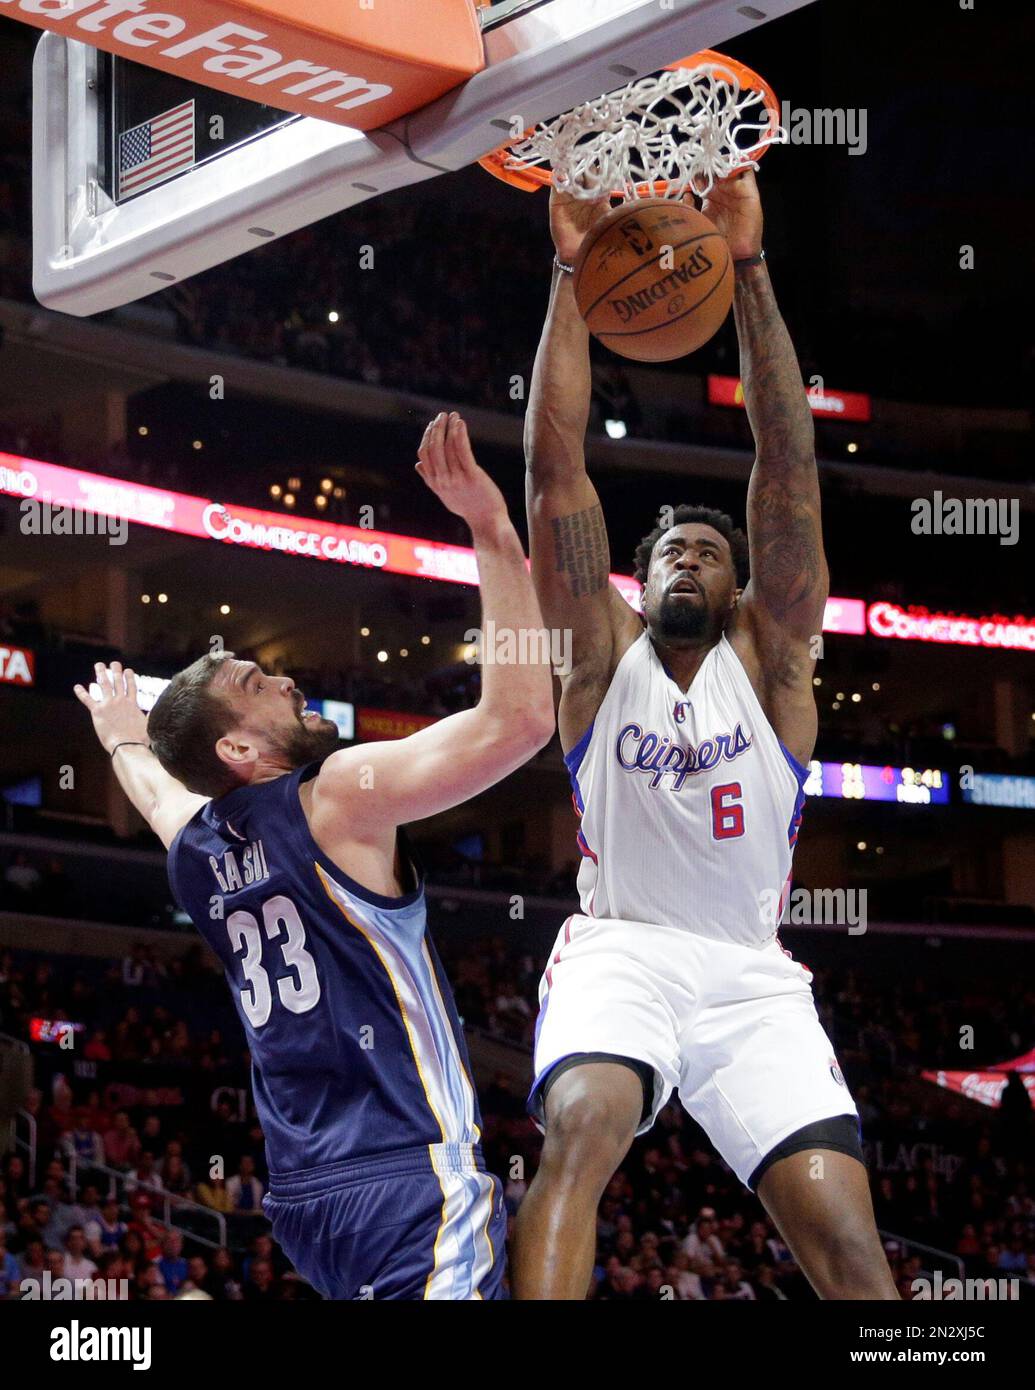 Los Angeles Clippers' DeAndre Jordan, left, dunks against Memphis Grizzlies' Marc Gasol, of Spain, during the first half of an NBA basketball game, Monday, Feb. 23, 2015, in Los Angeles. (AP Photo/Jae C. Hong) Stockfoto